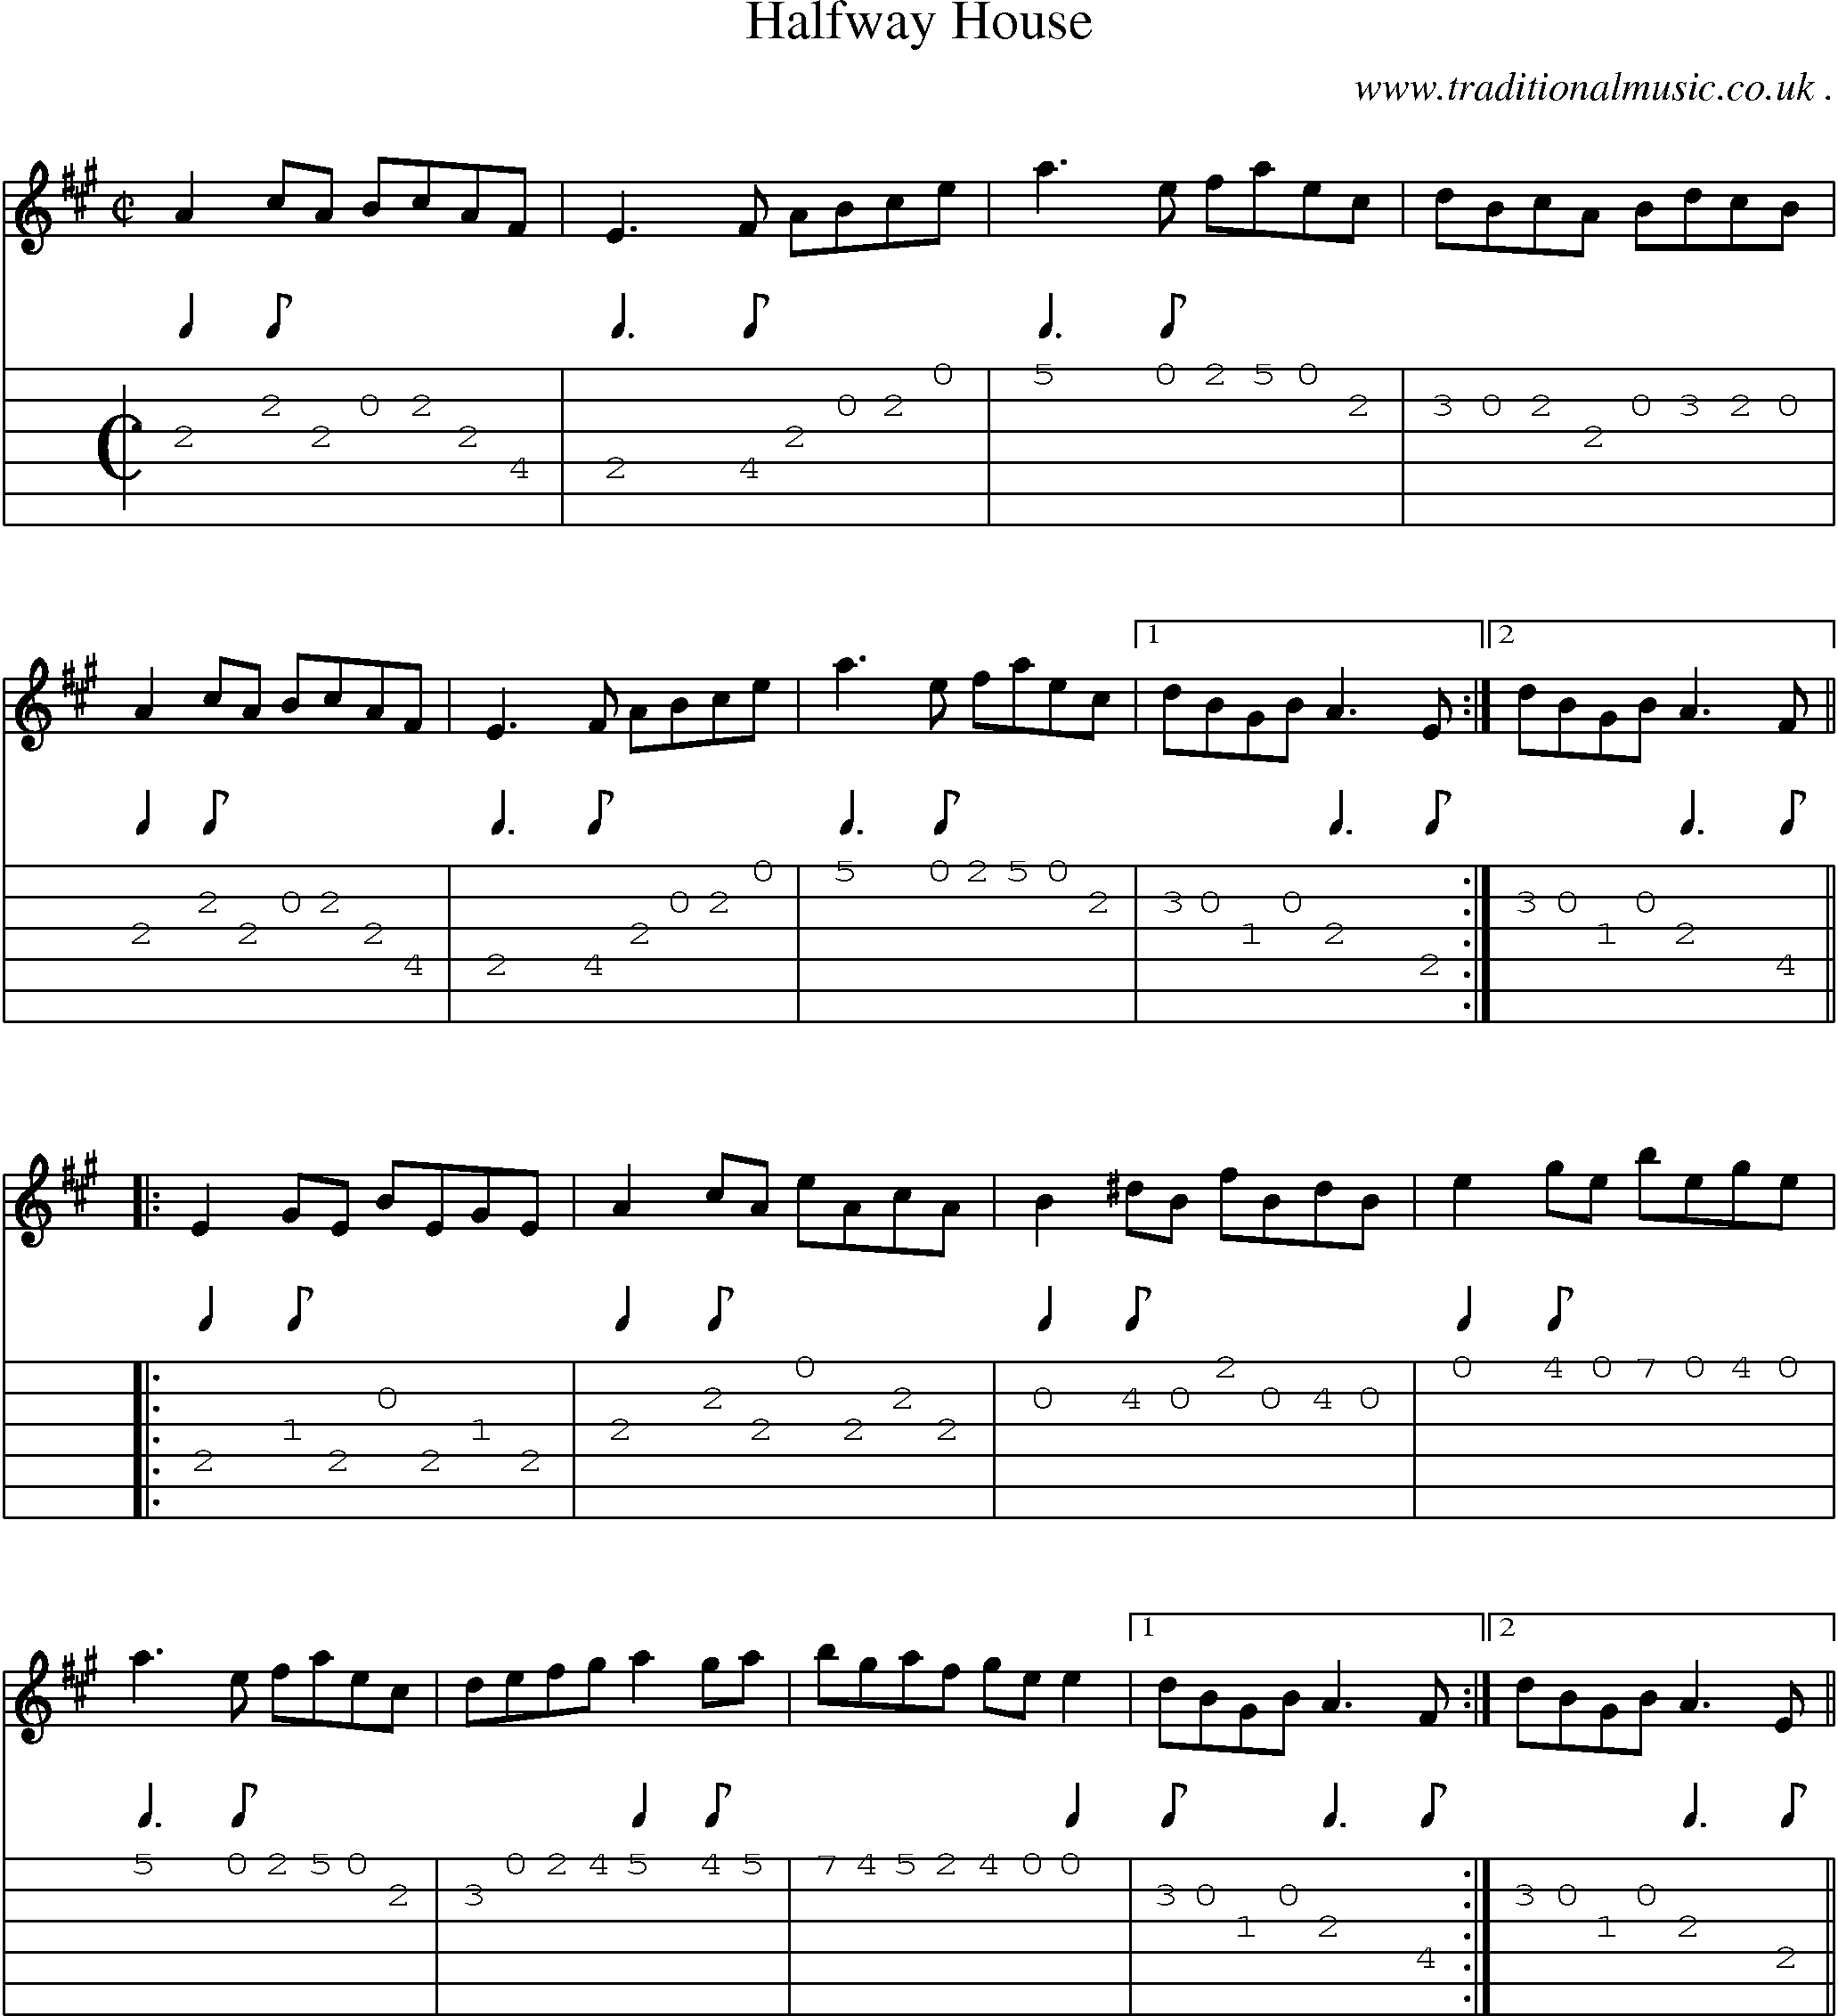 Sheet-Music and Guitar Tabs for Halfway House